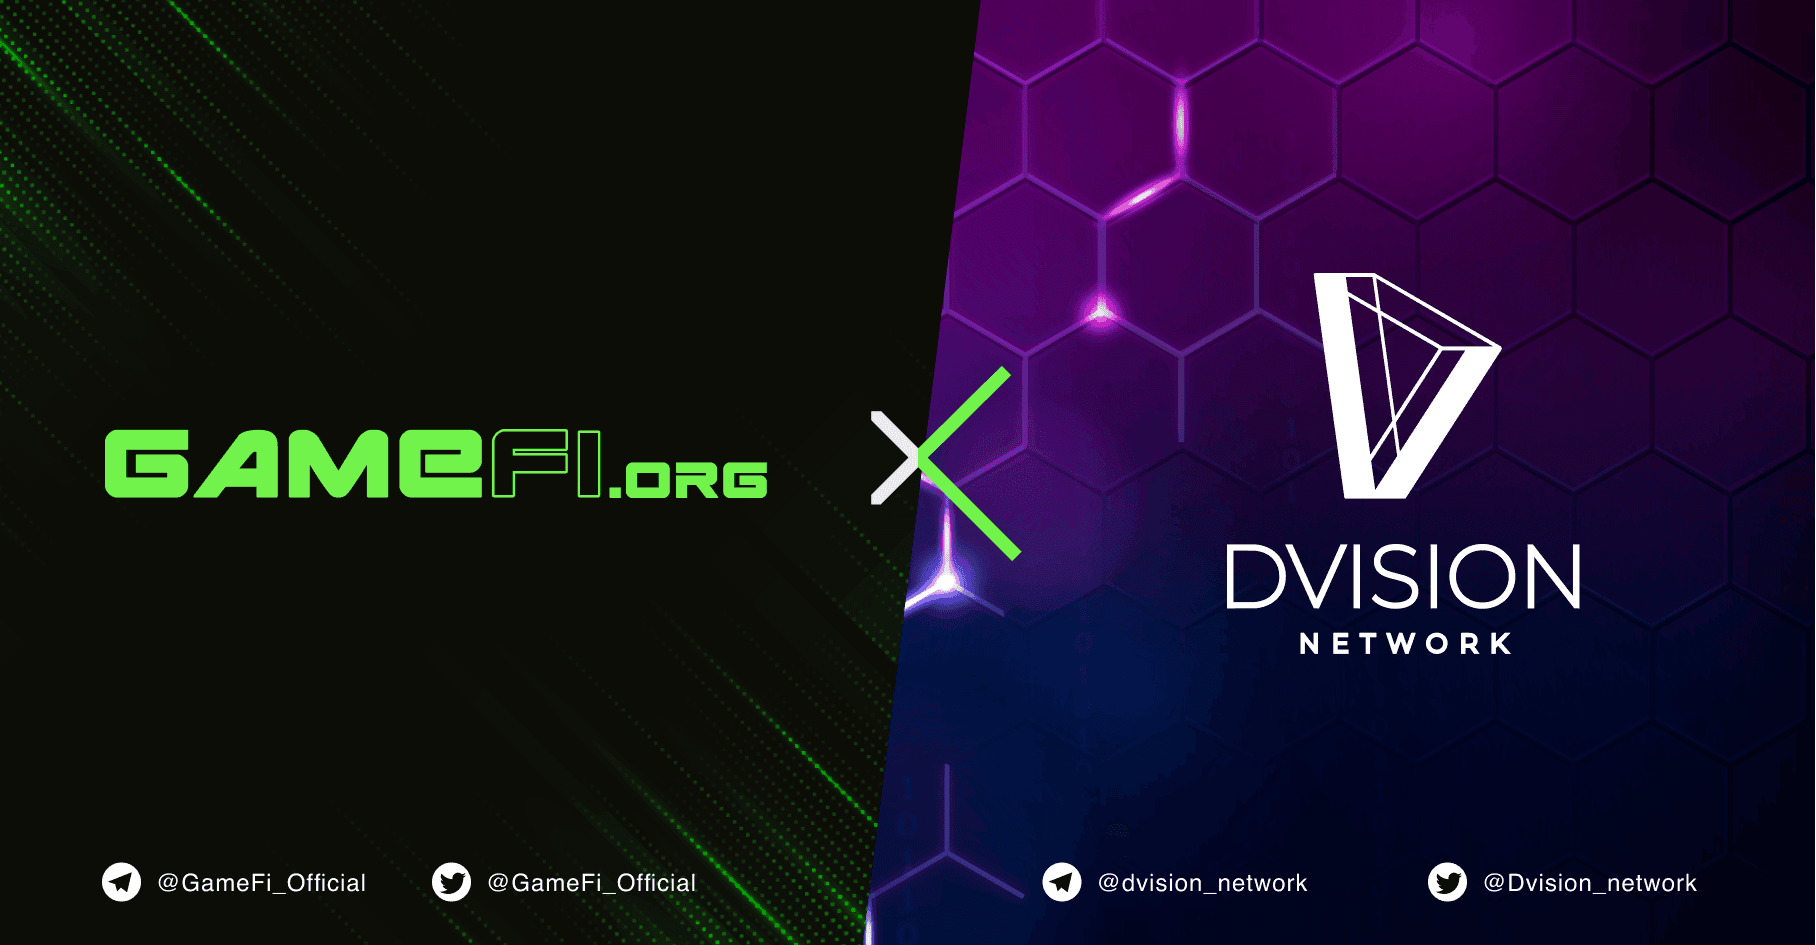 GameFi.org and Dvision Network: Partnership to Embrace Metaverse Adoption in the New Era of Virtual Ecosystems